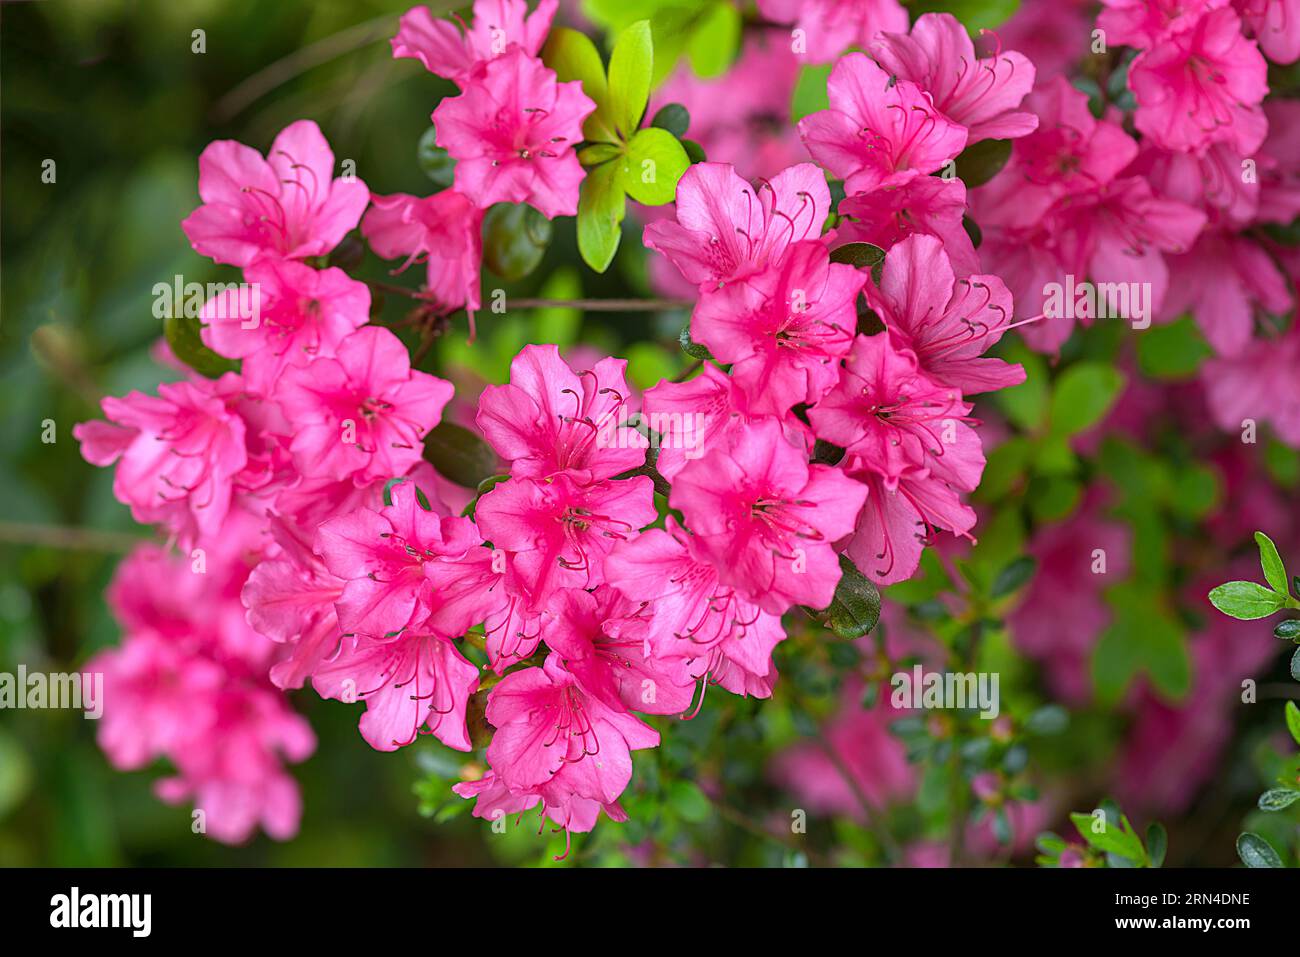 Blossoms of the azalea (rhododendron) in the city park of Lahr, Baden-Wuerttemberg, Germany Stock Photo